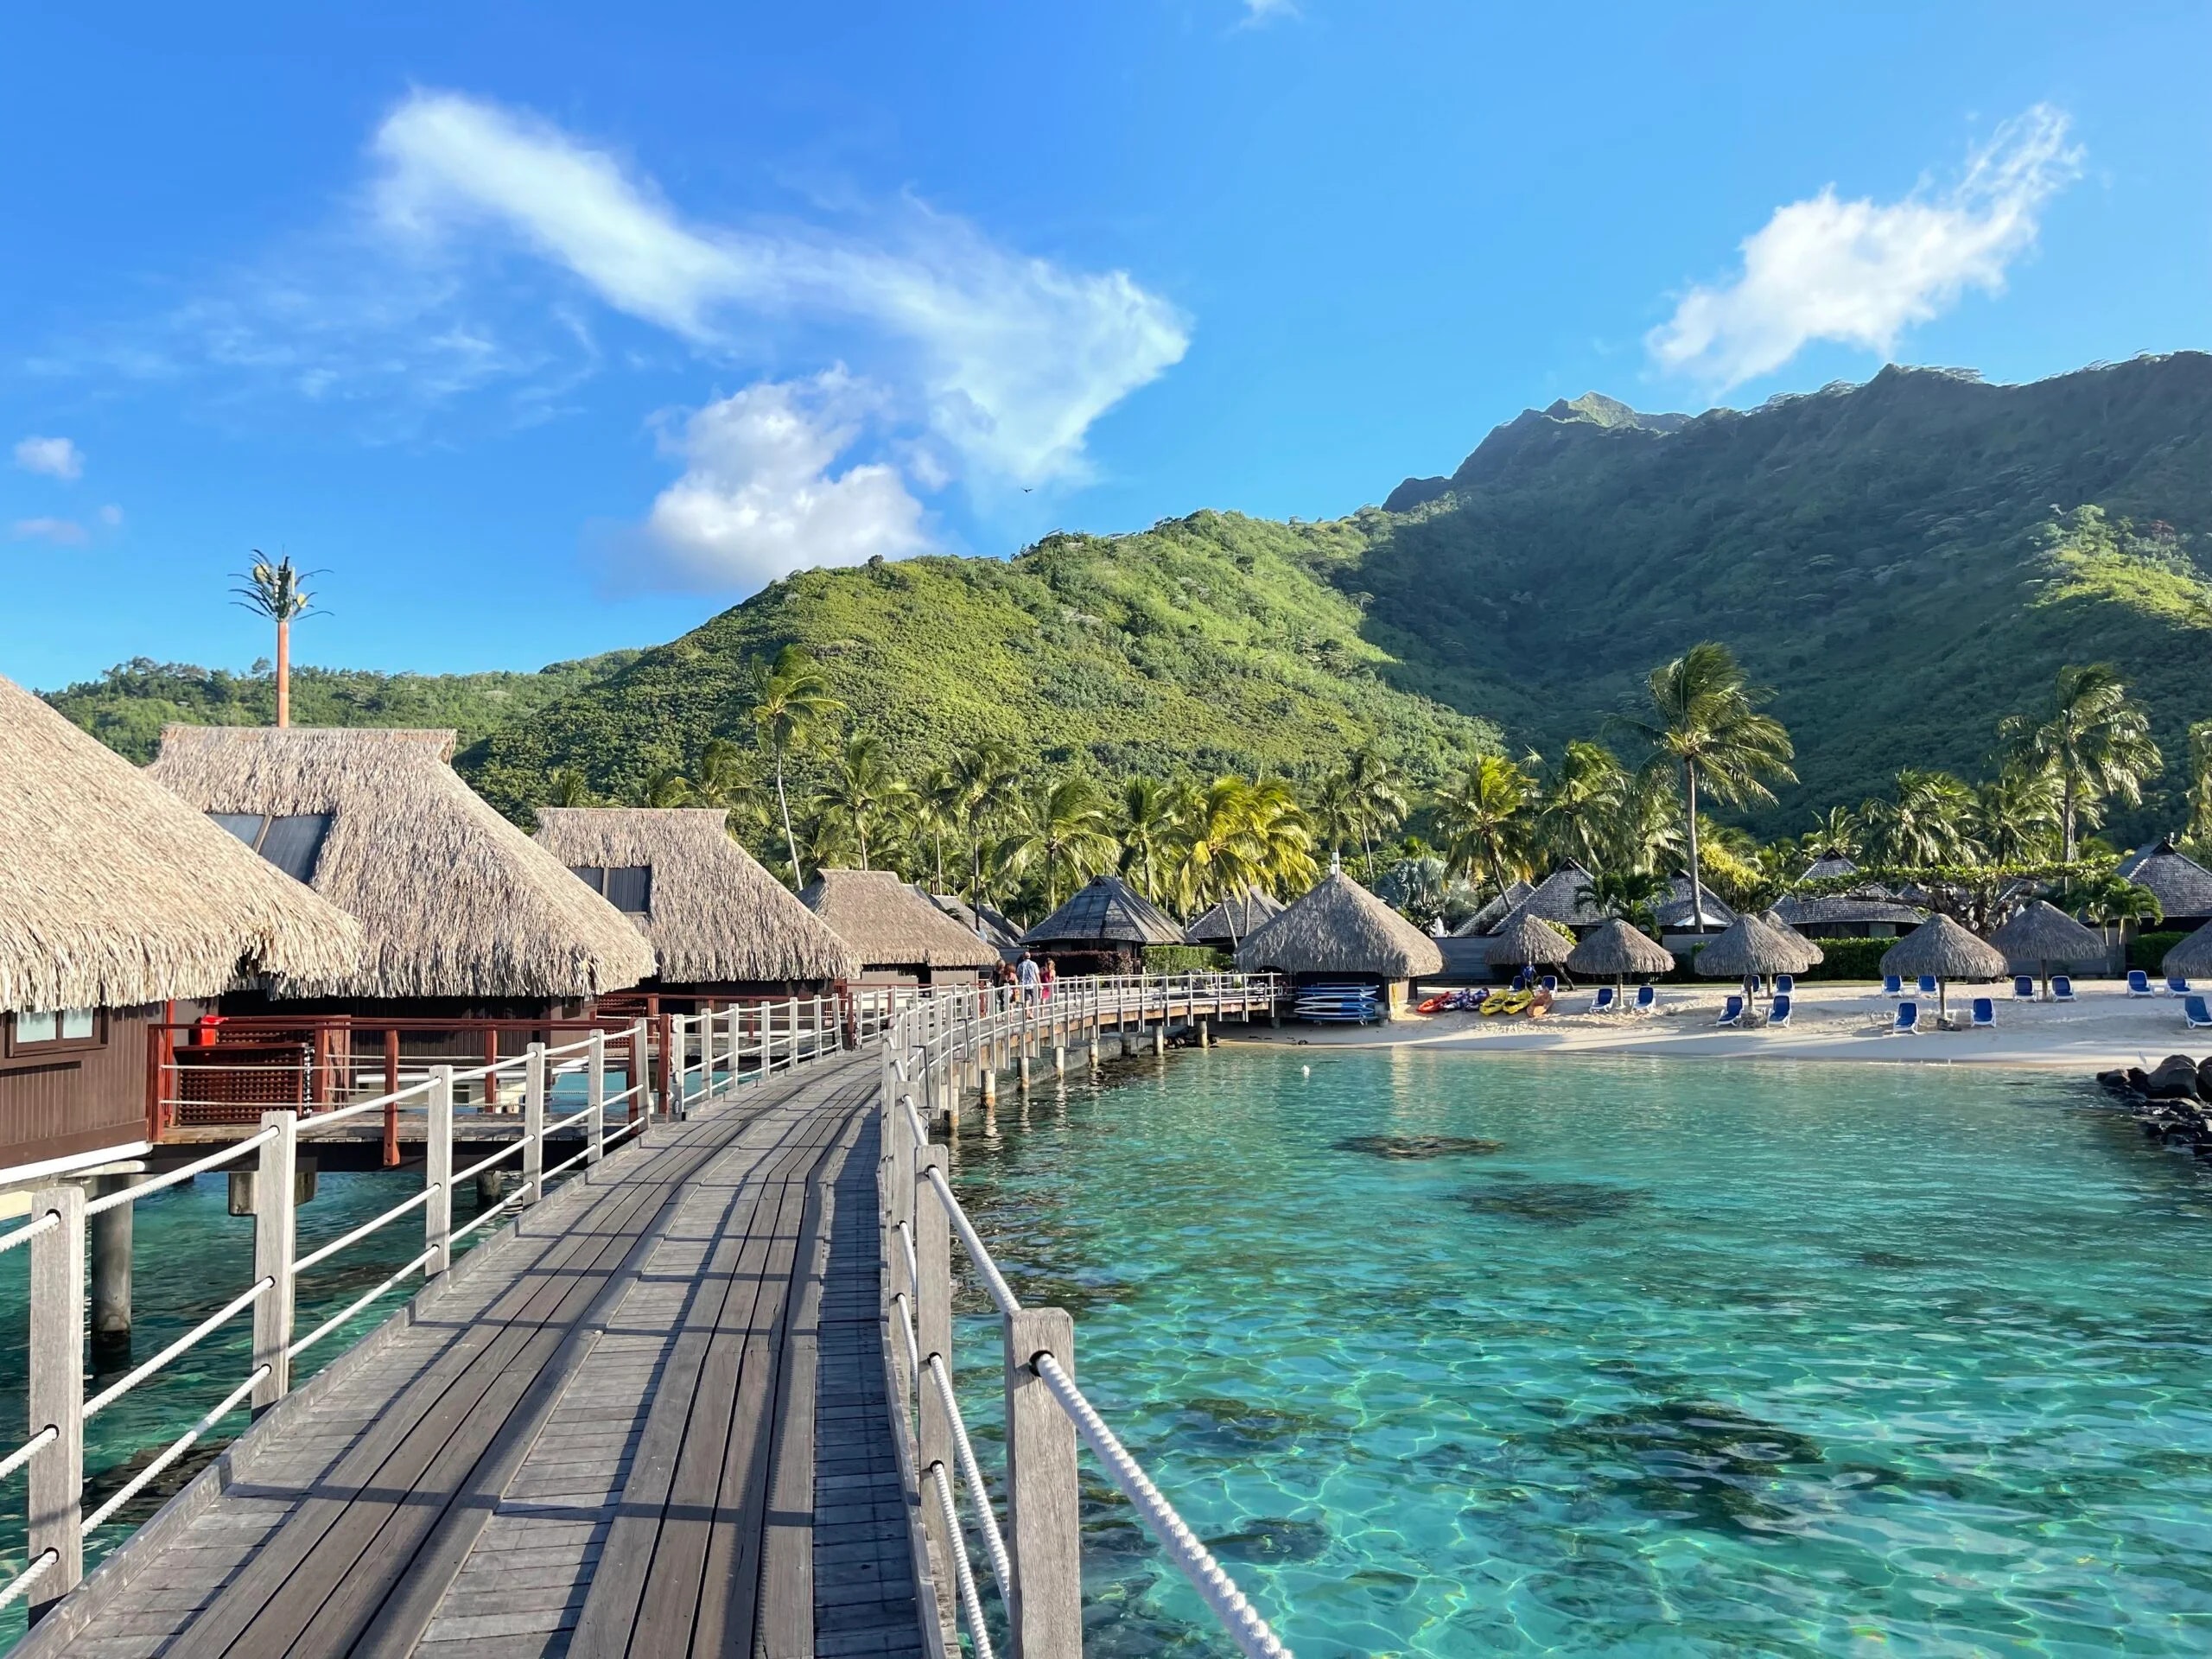 The overwater bungalows at Hilton Moorea Lagoon Resort & Spa